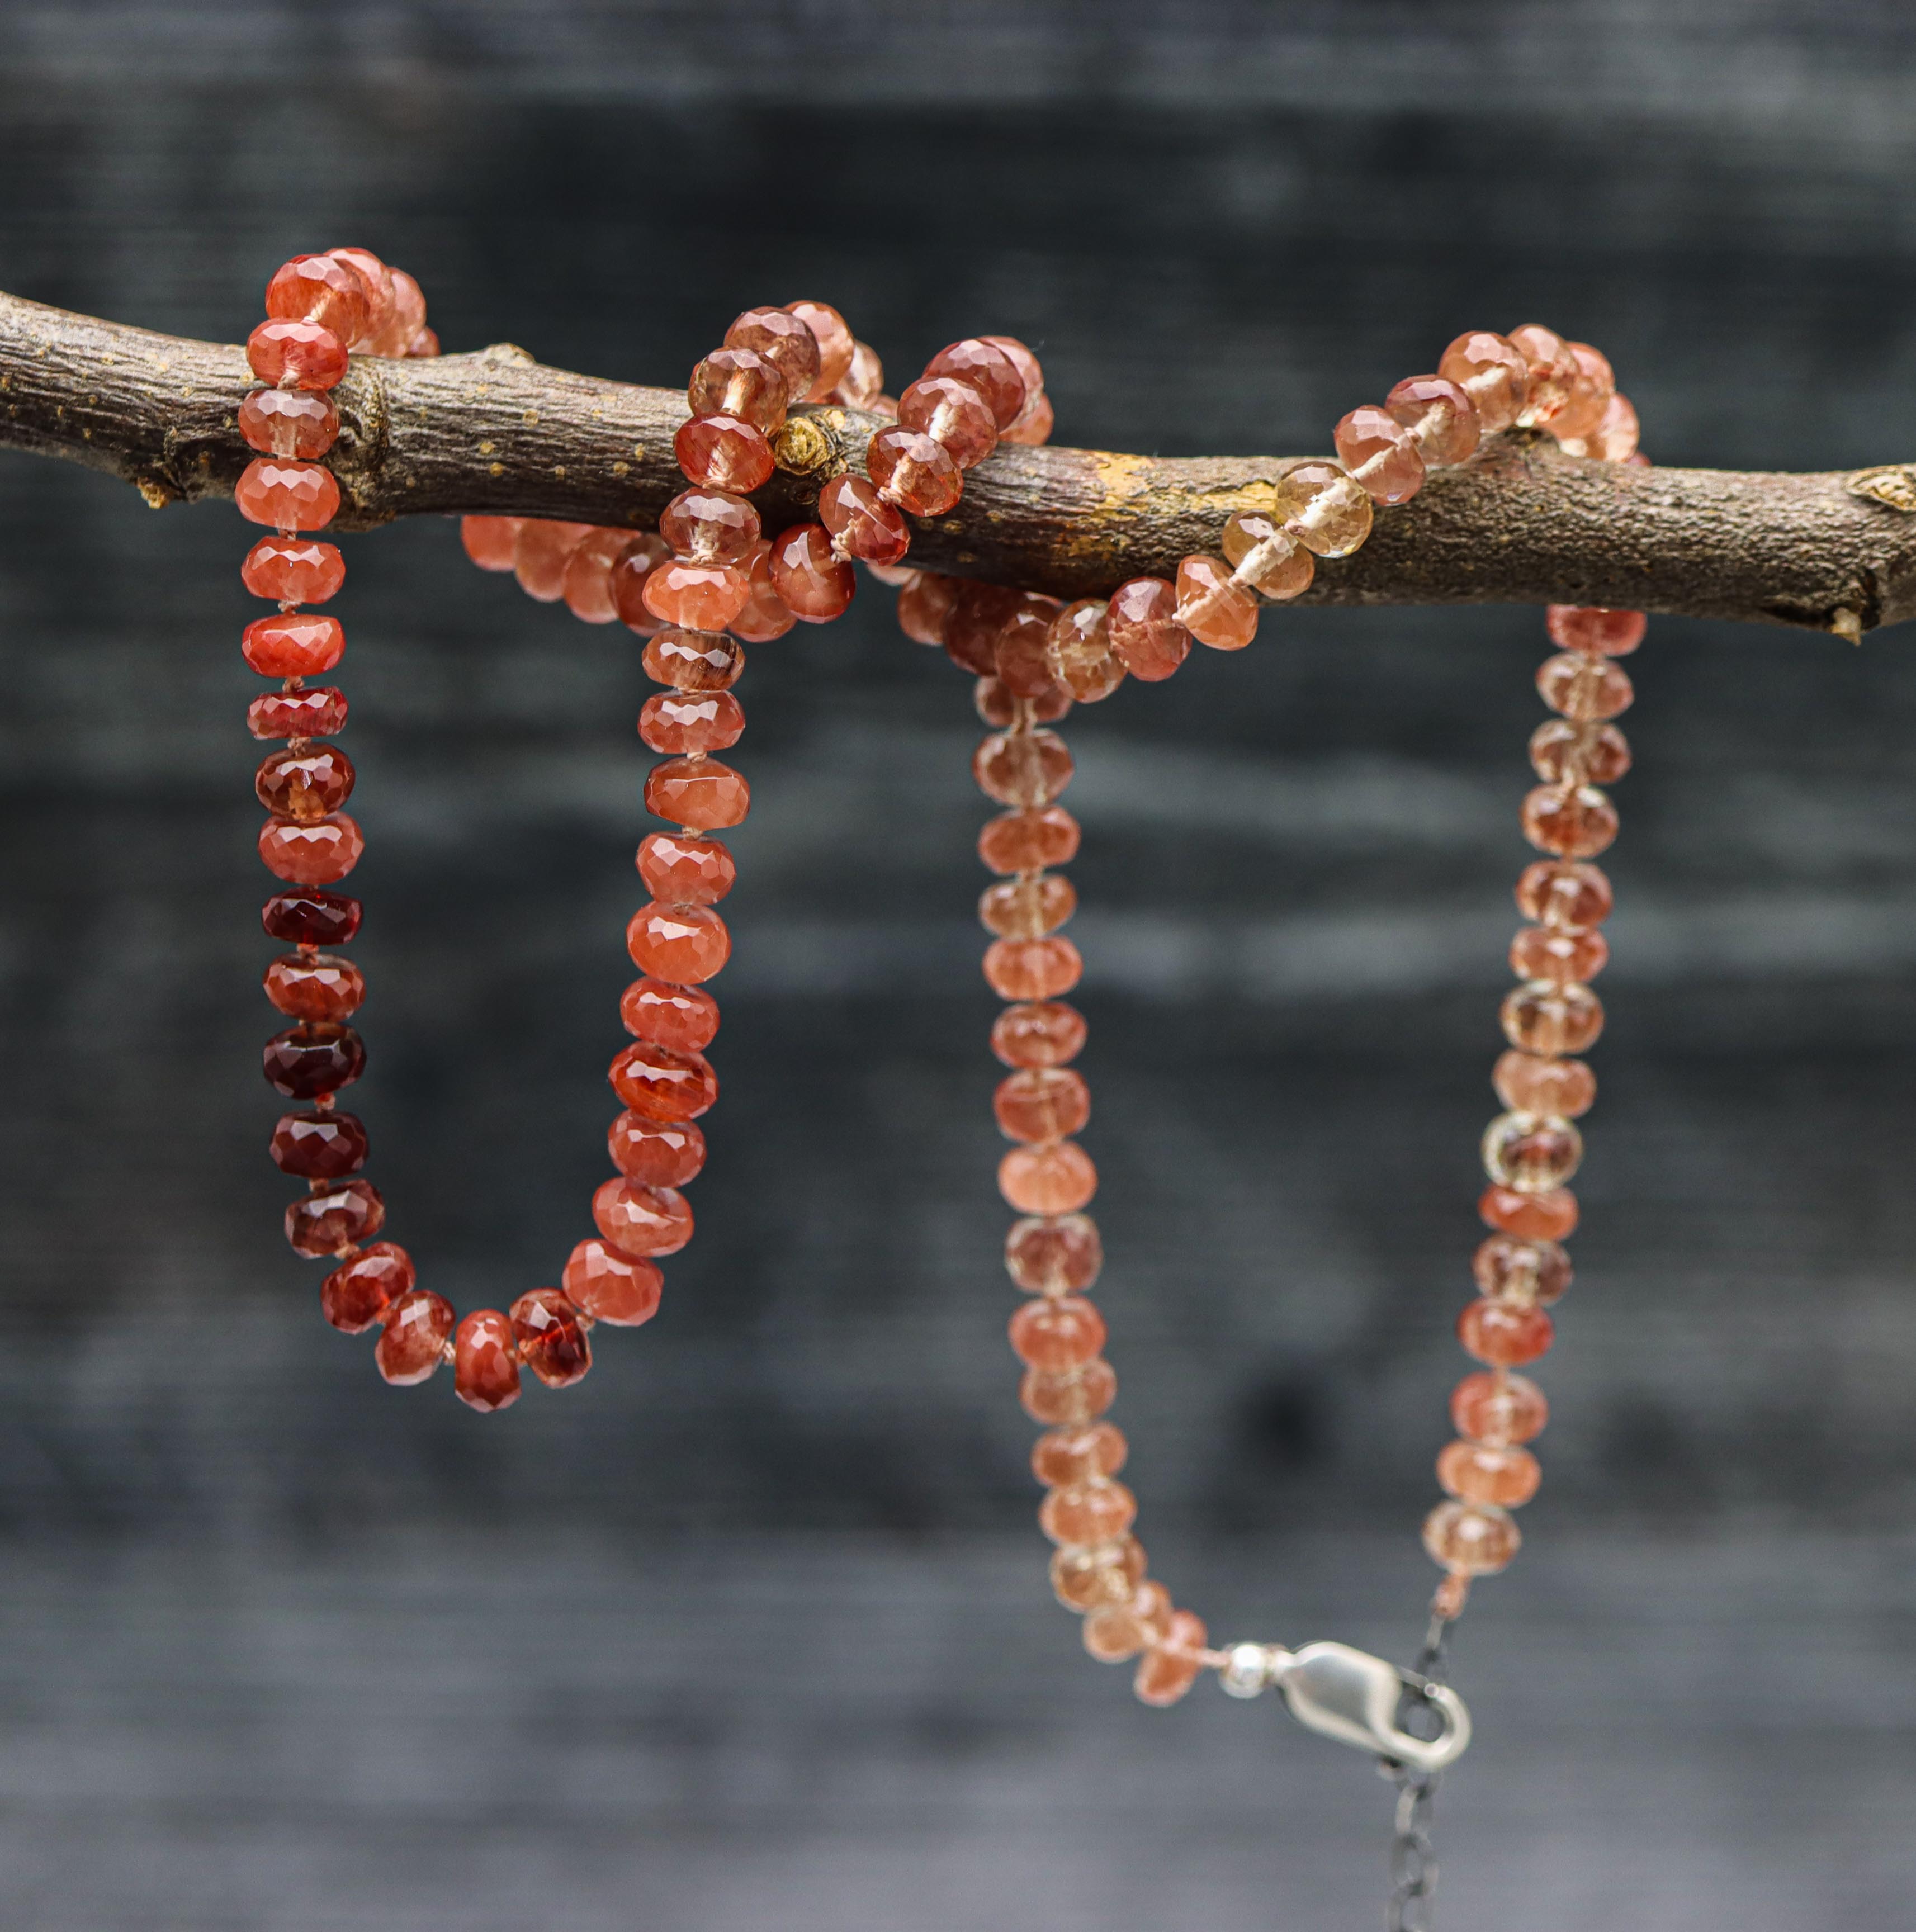 Pearl Beaded Necklace - Necklace With Lobster - Long Knotted Beads Necklace  -Single Wrap Necklace - Gemstone Necklace (Without Pendant) BN052 | Beaded  necklace, Wrap necklaces, Gemstone necklace